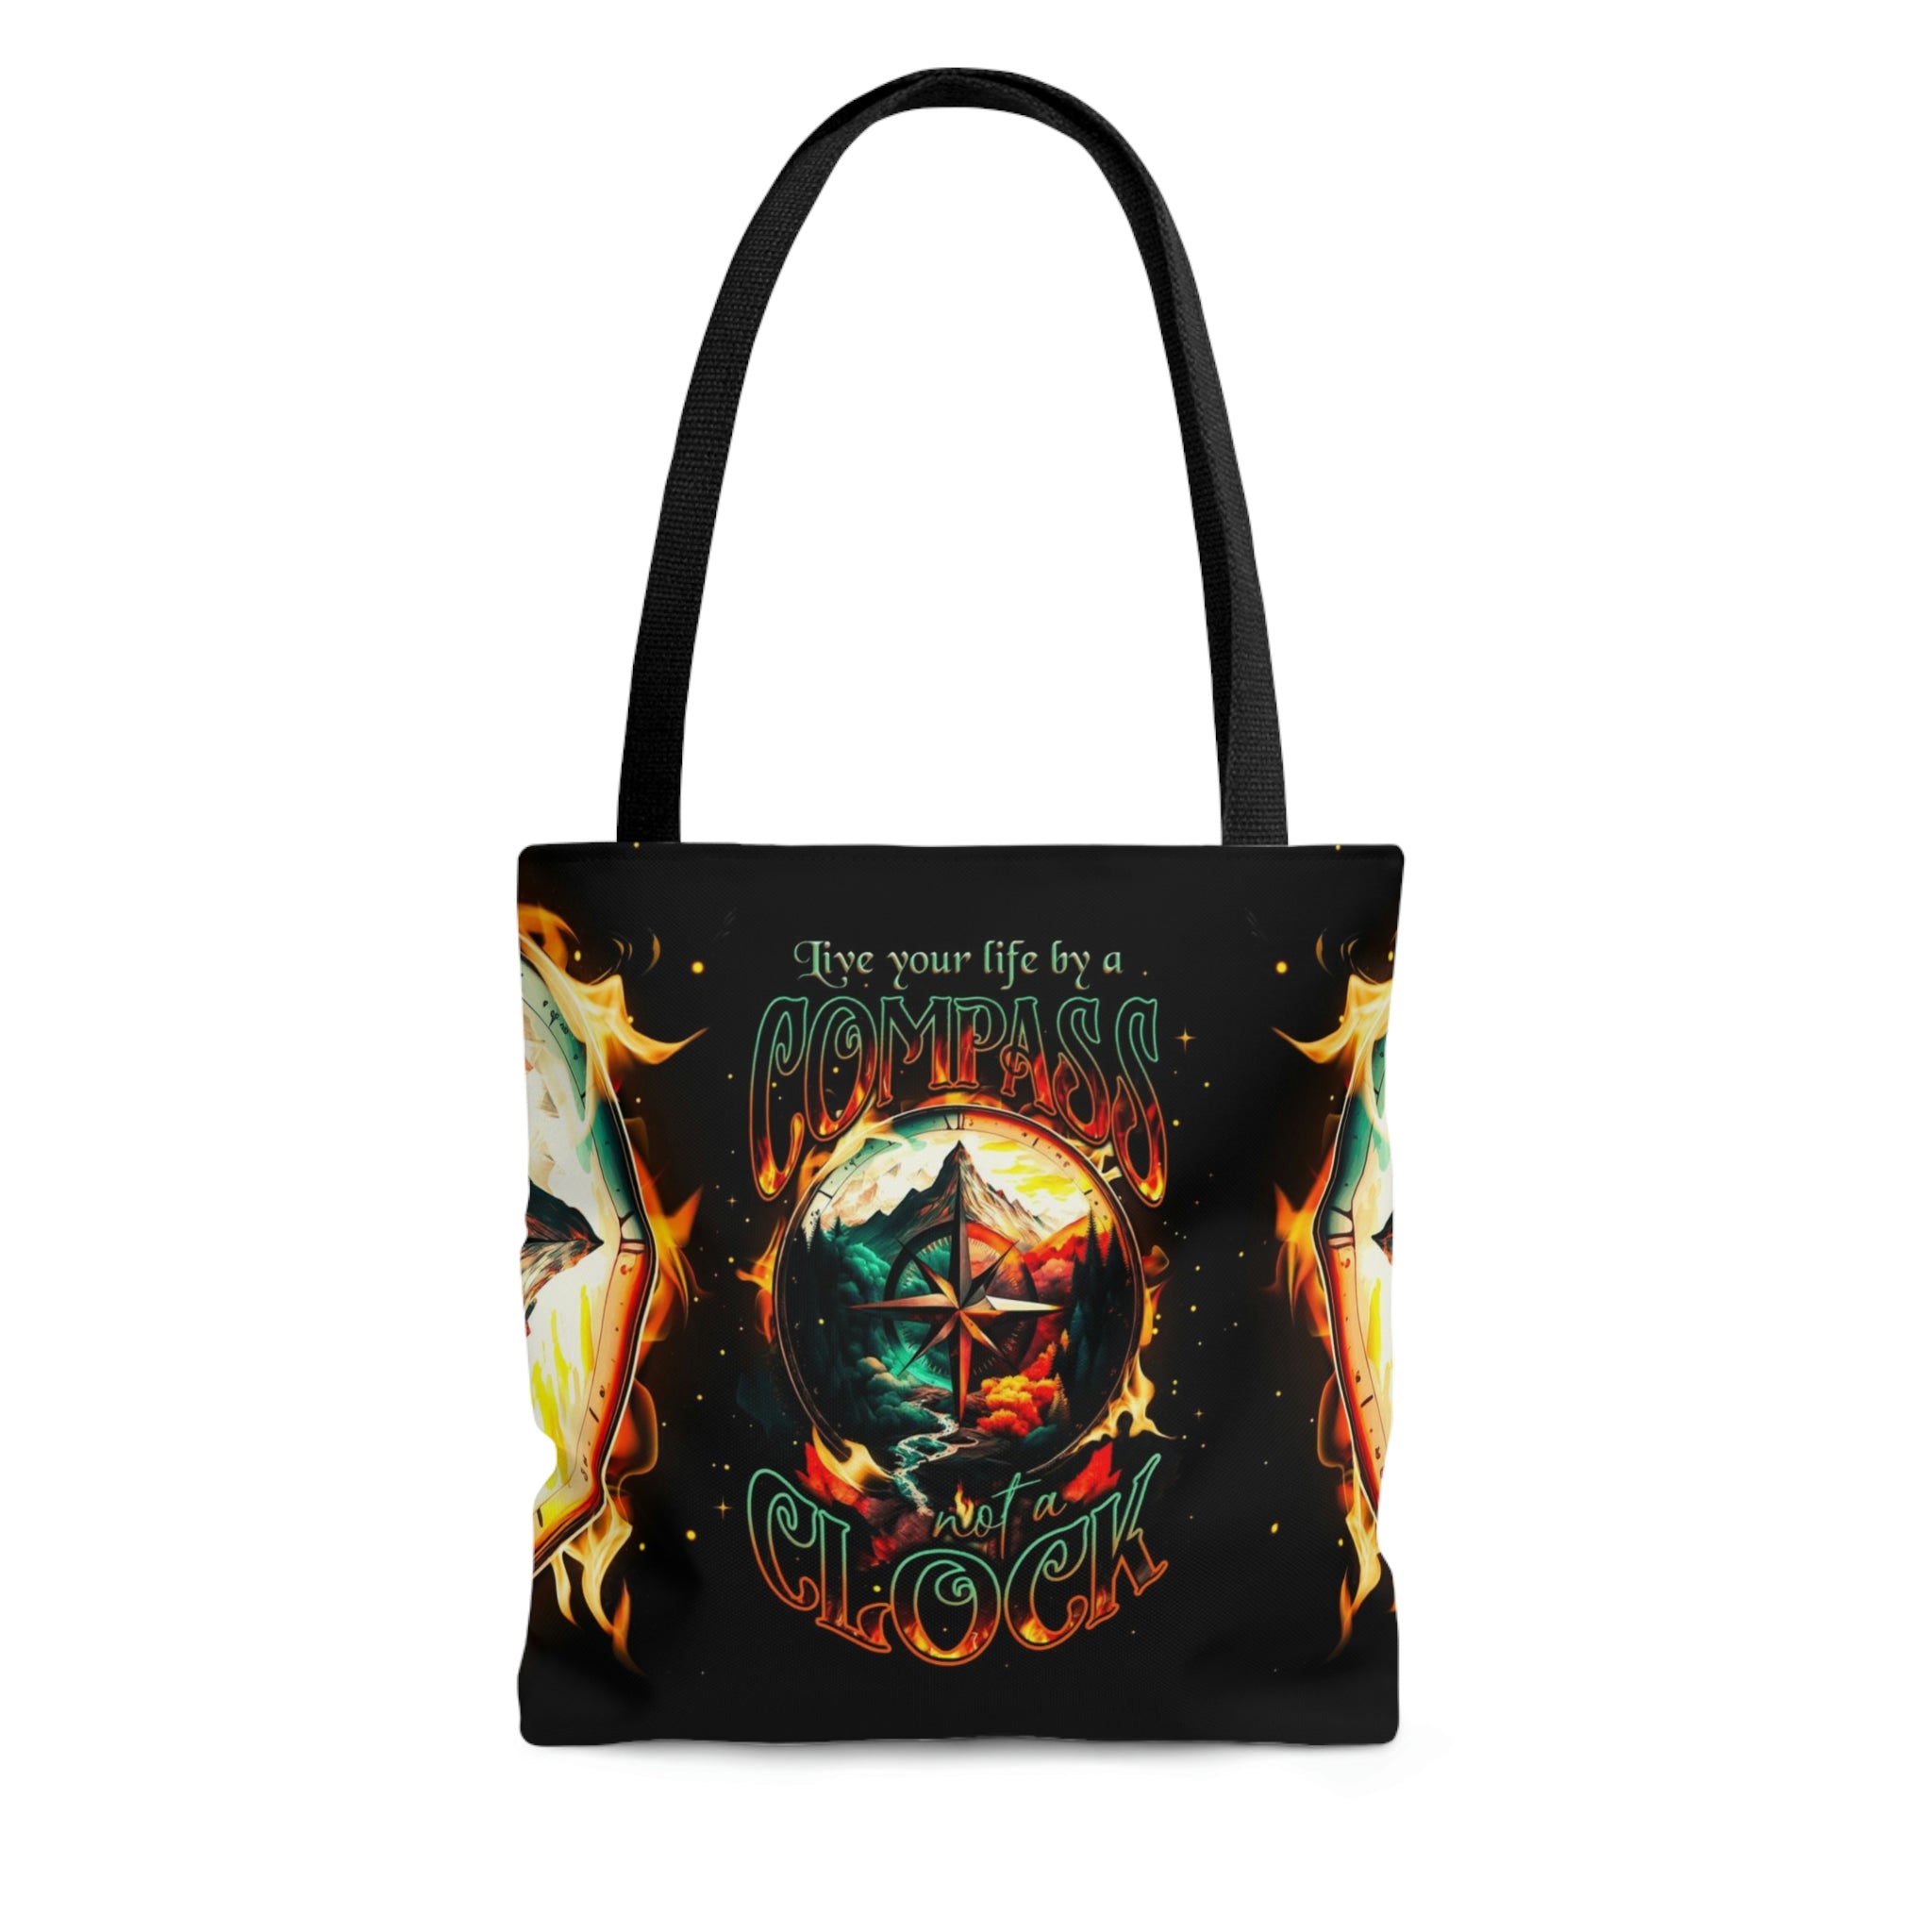 LIVE YOUR LIFE BY A COMPASS TOTE BAG - TY2804235